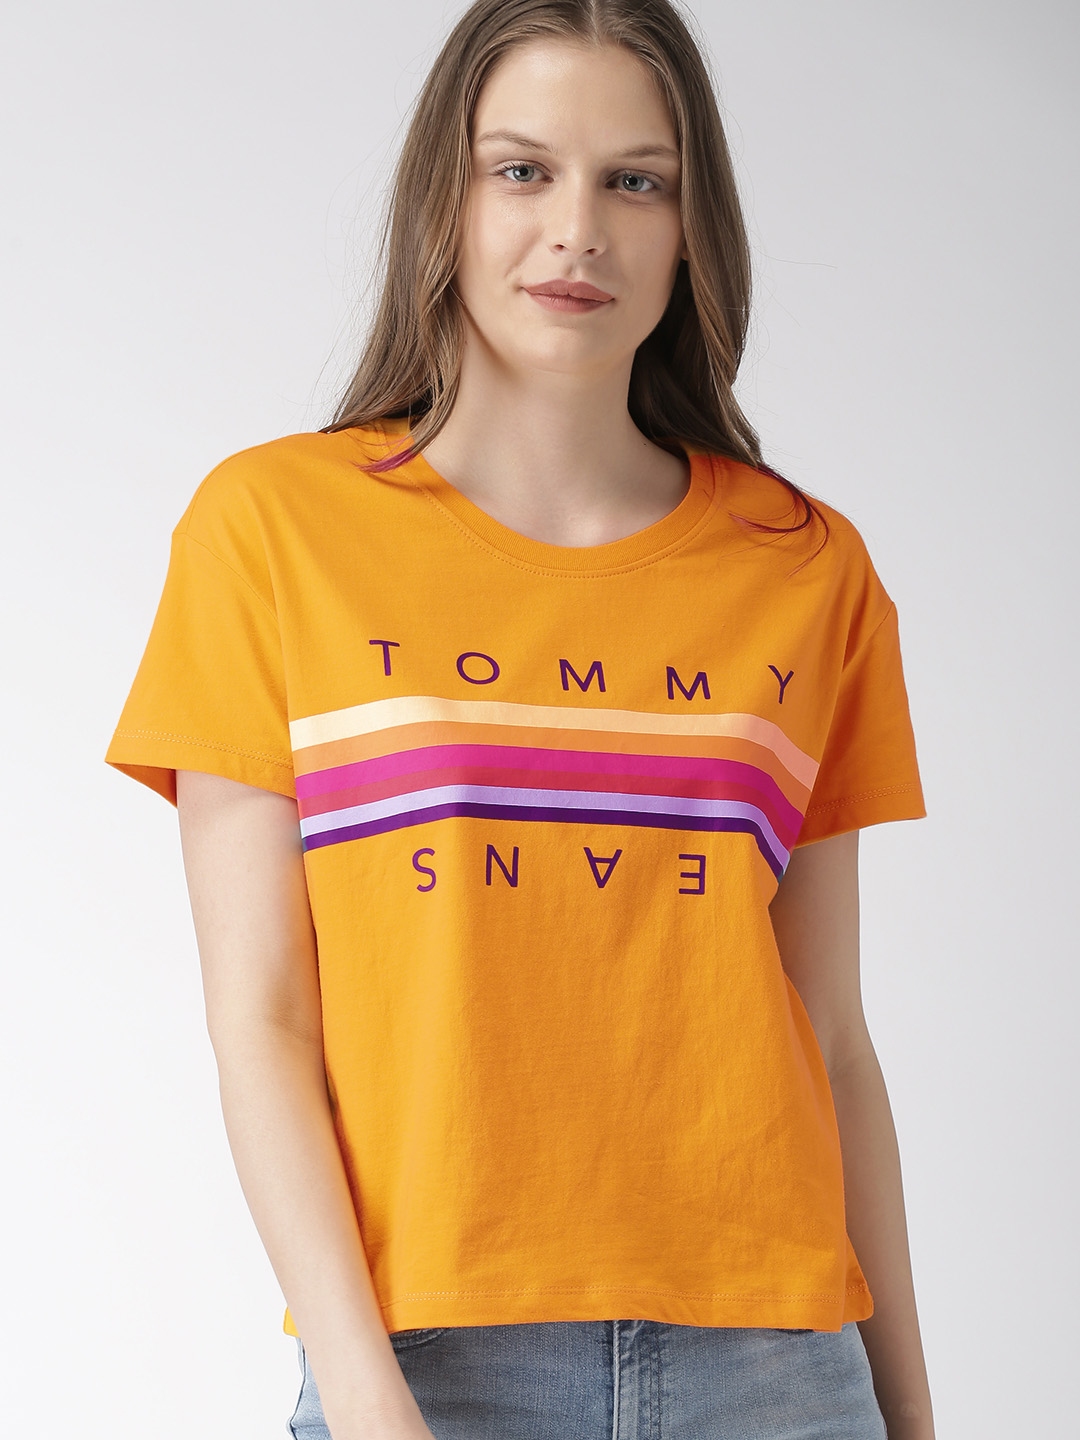 Buy Tommy Mustard Yellow Round Neck T Shirt Tshirts for Women 9250937 | Myntra